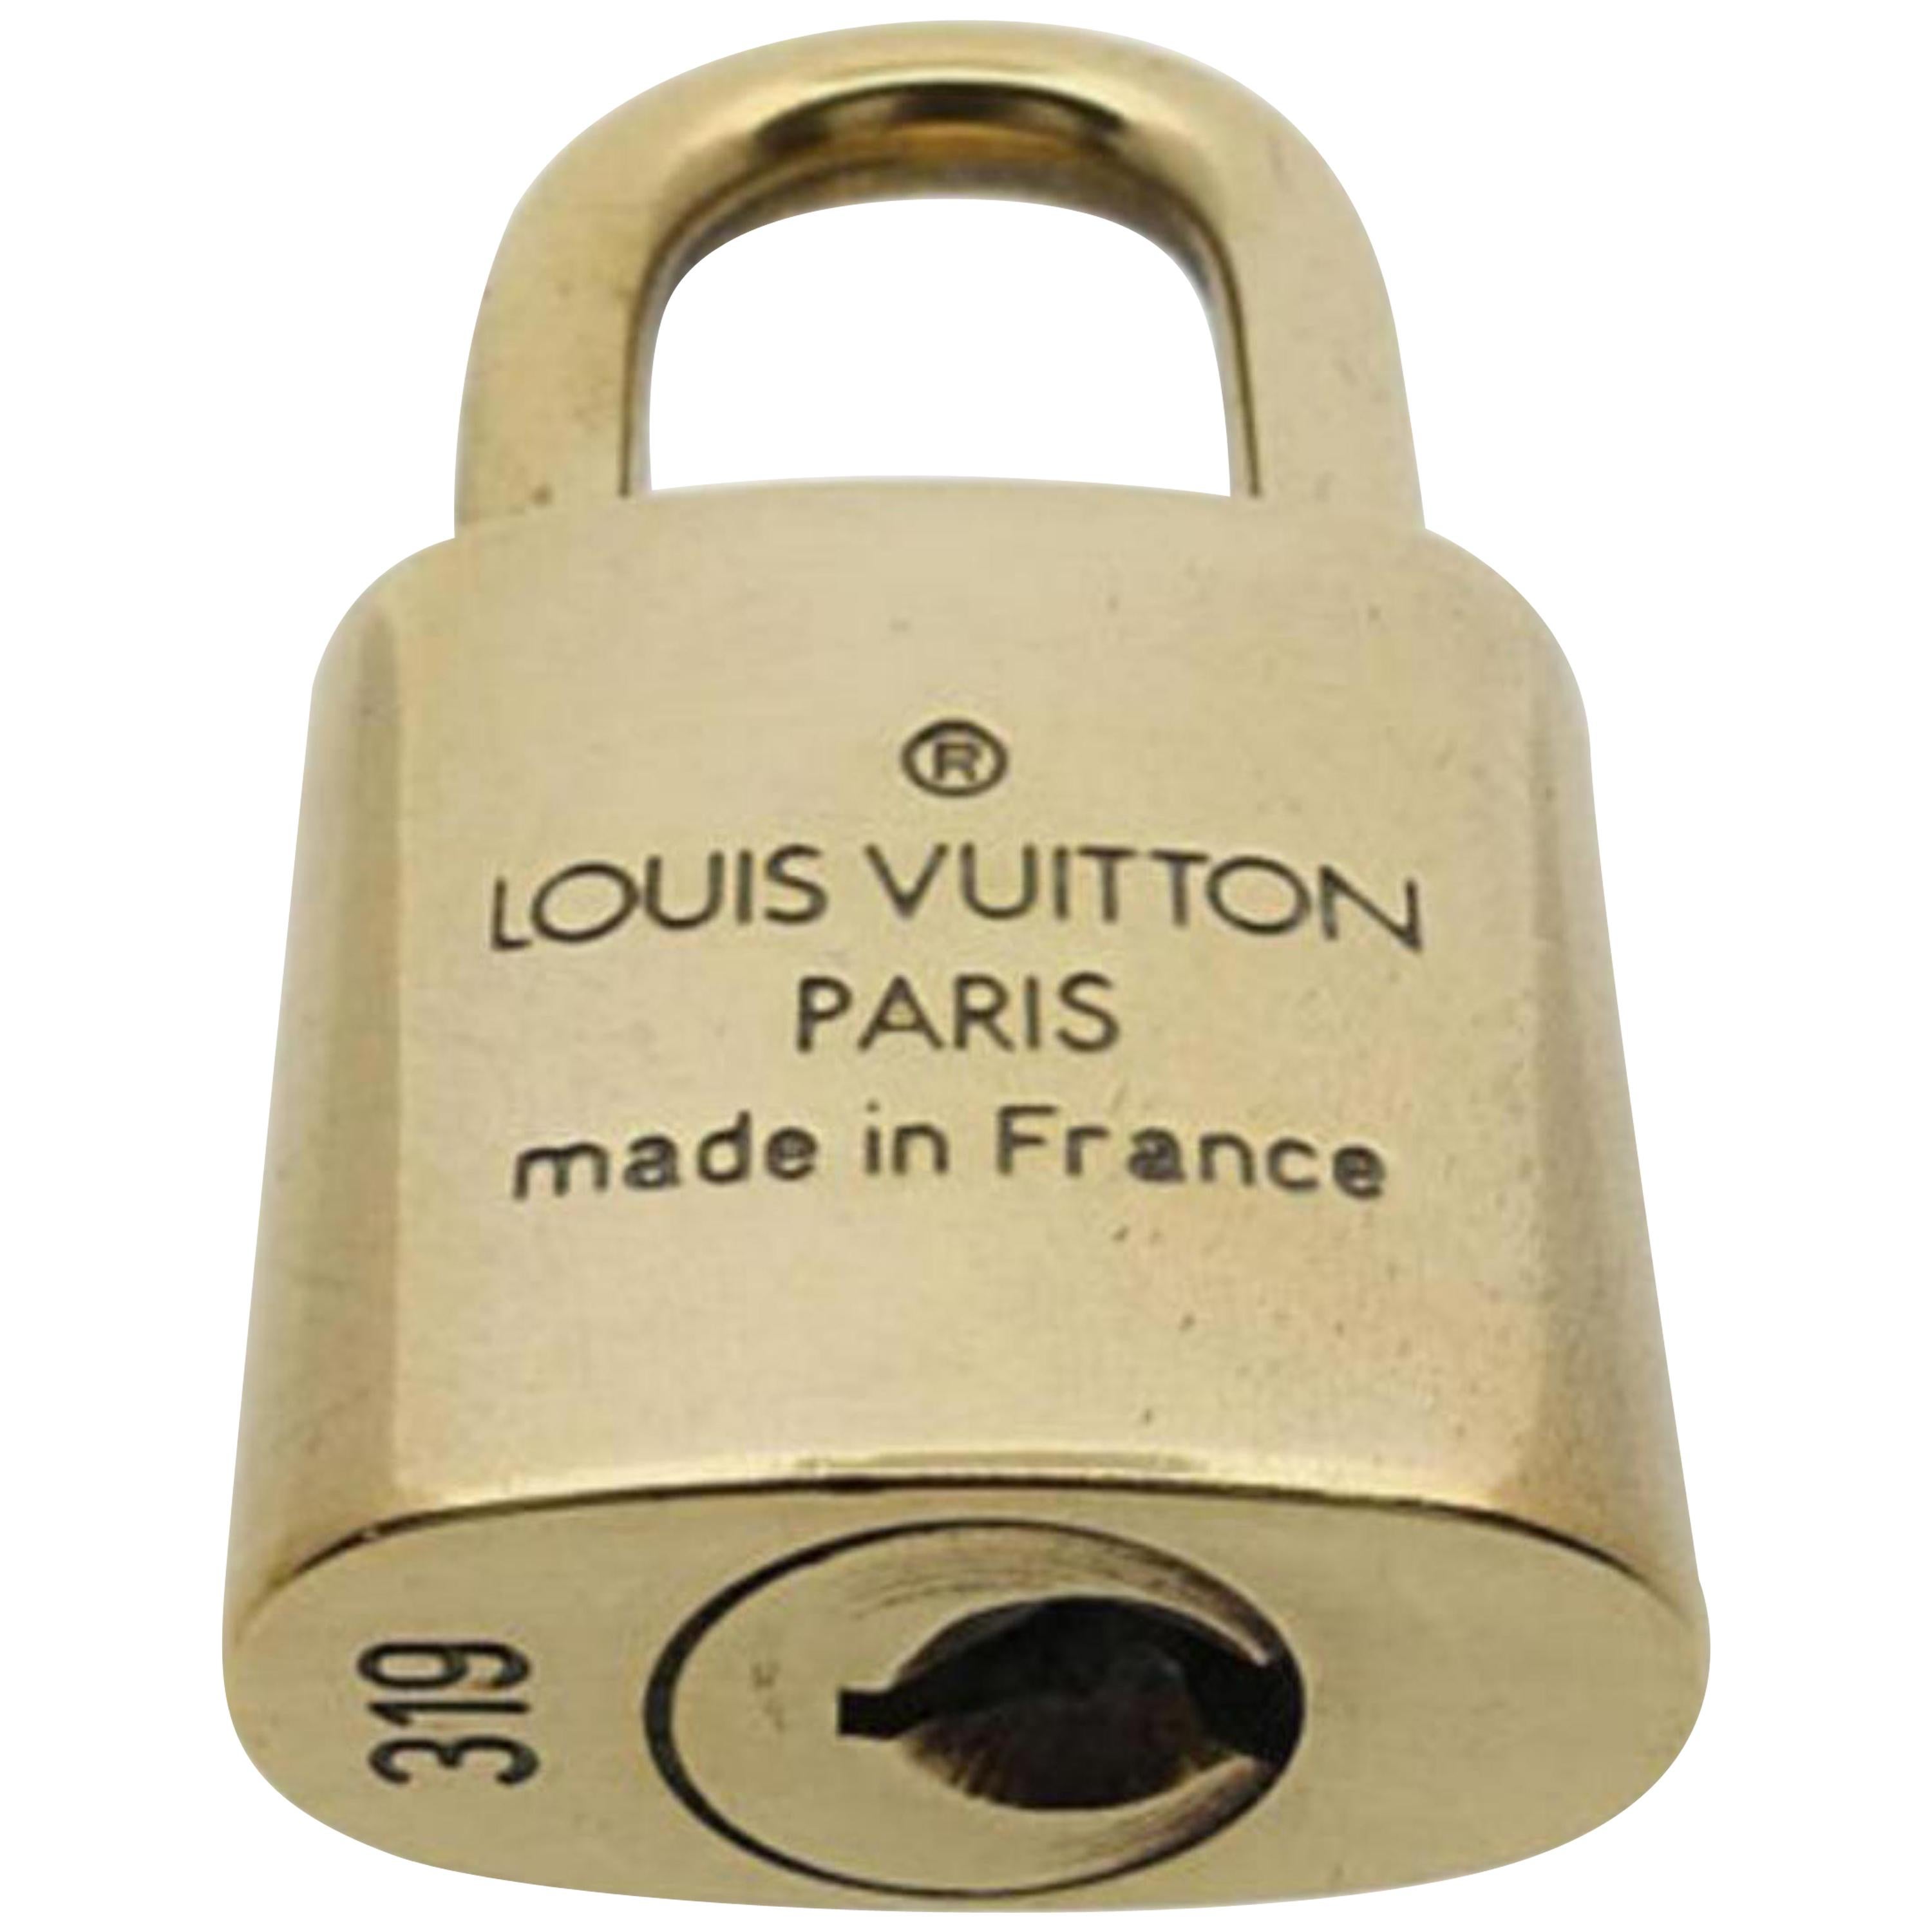 Louis Vuitton Gold Single Key Lock Pad Lock and Key 867695 For Sale